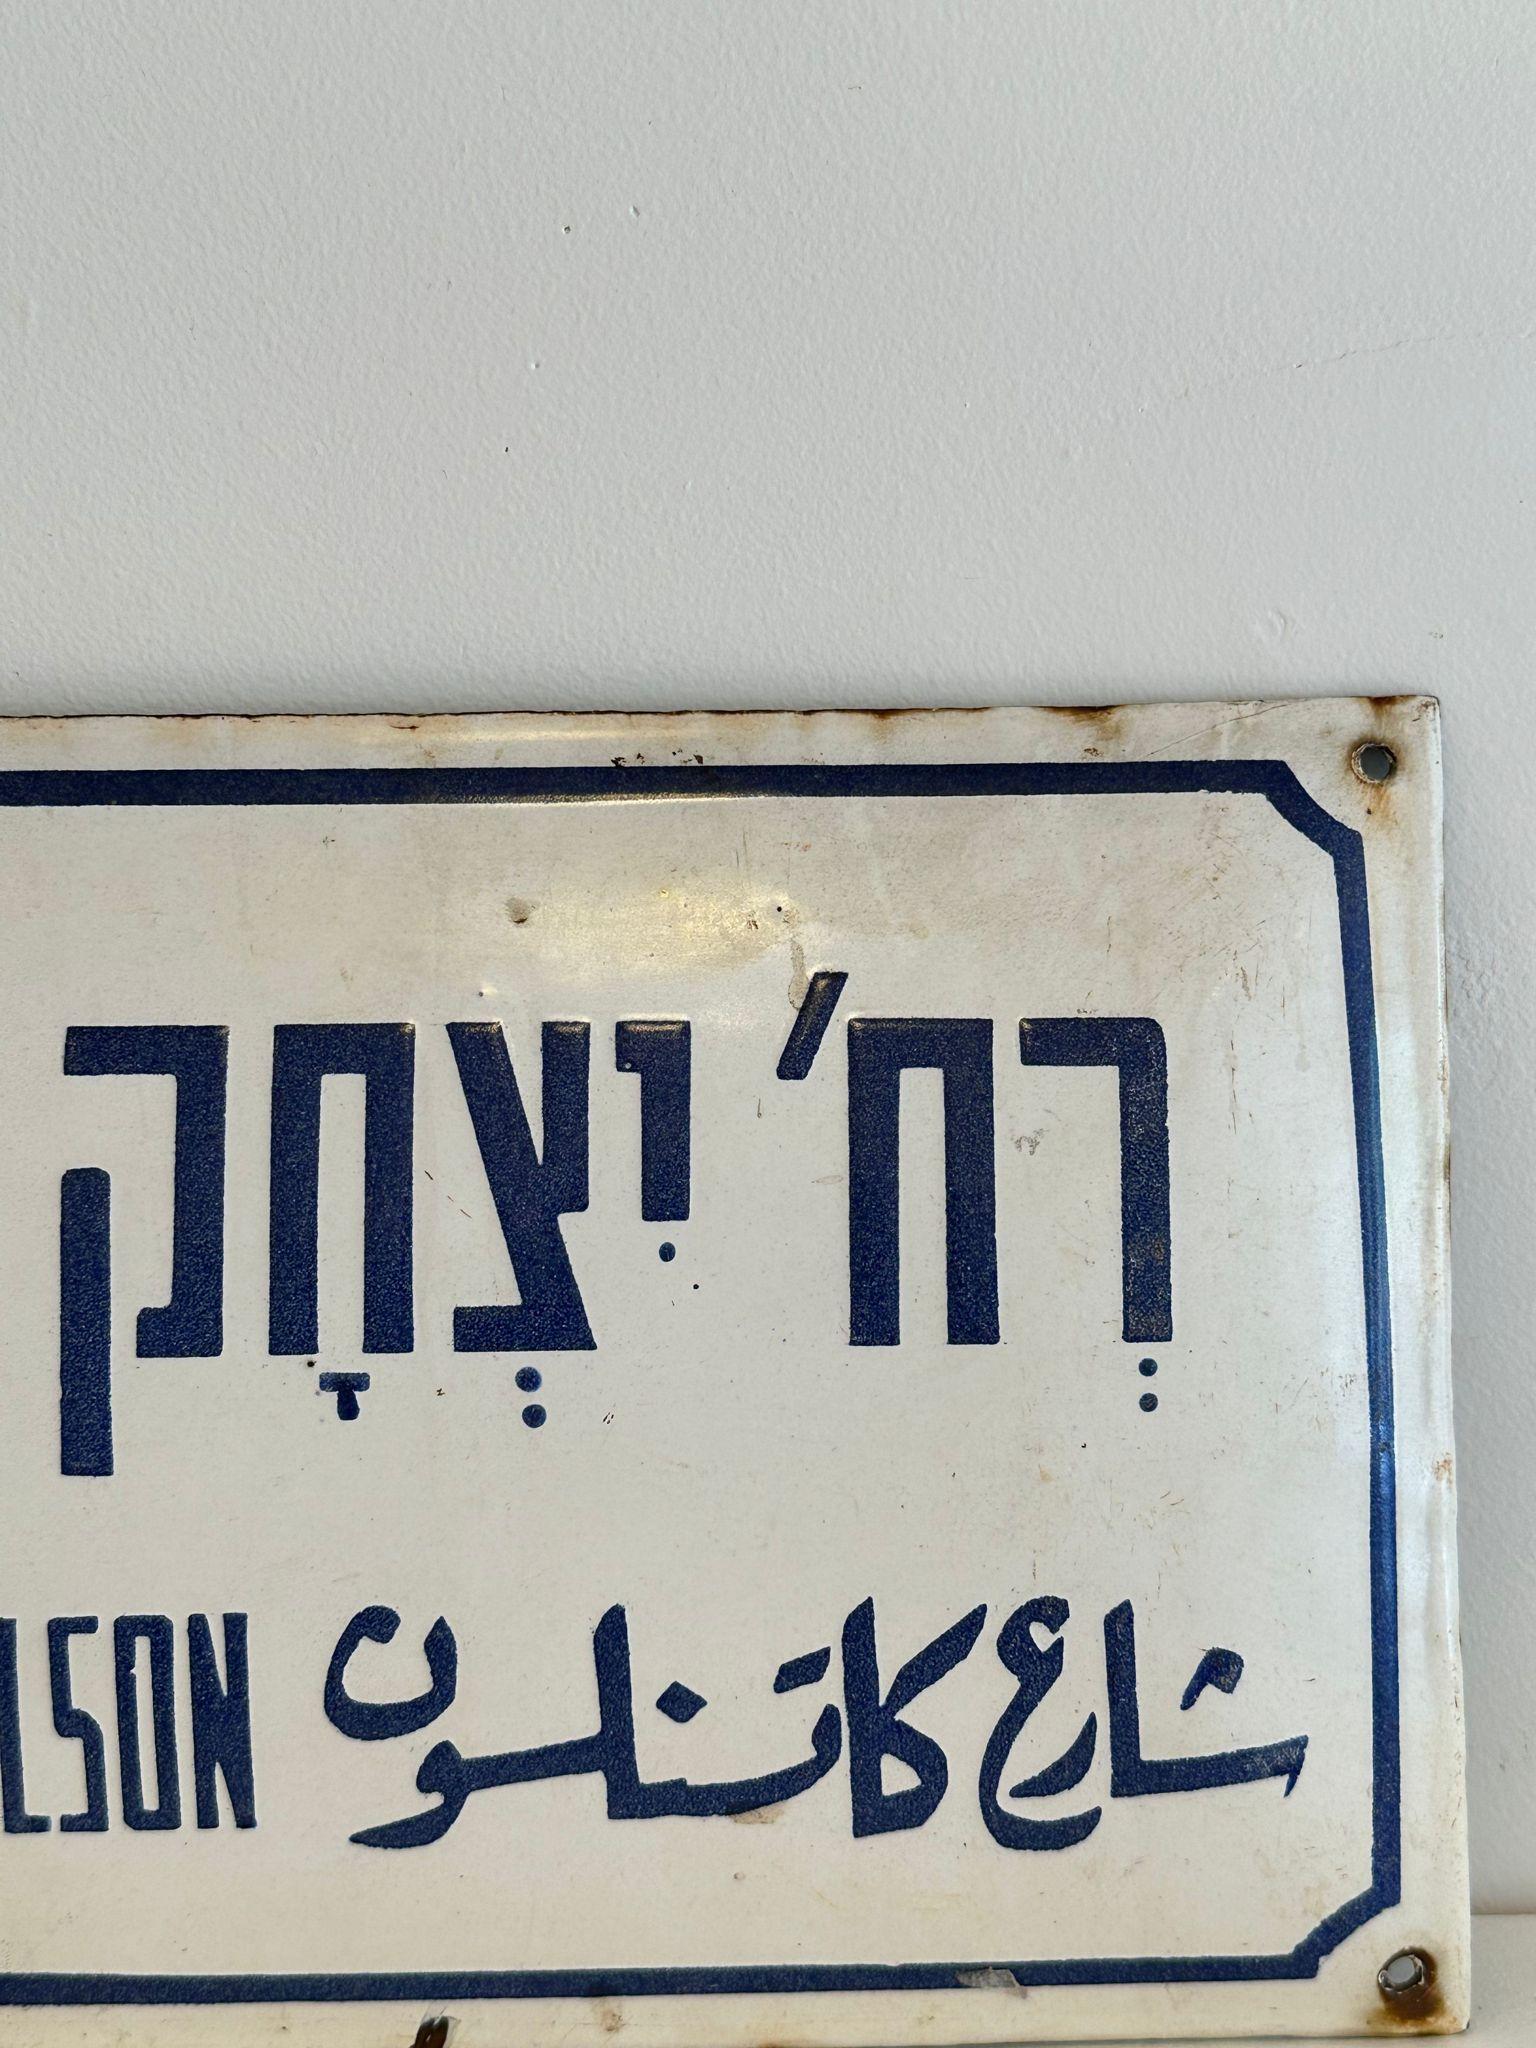 Mid-20th century handmade Israeli street name sign. Made of enamel and iron, this street sign was created shortly after the establishment of the state of Israel in 1948. The sign is written in bolt blue letters over a white background, alluding to